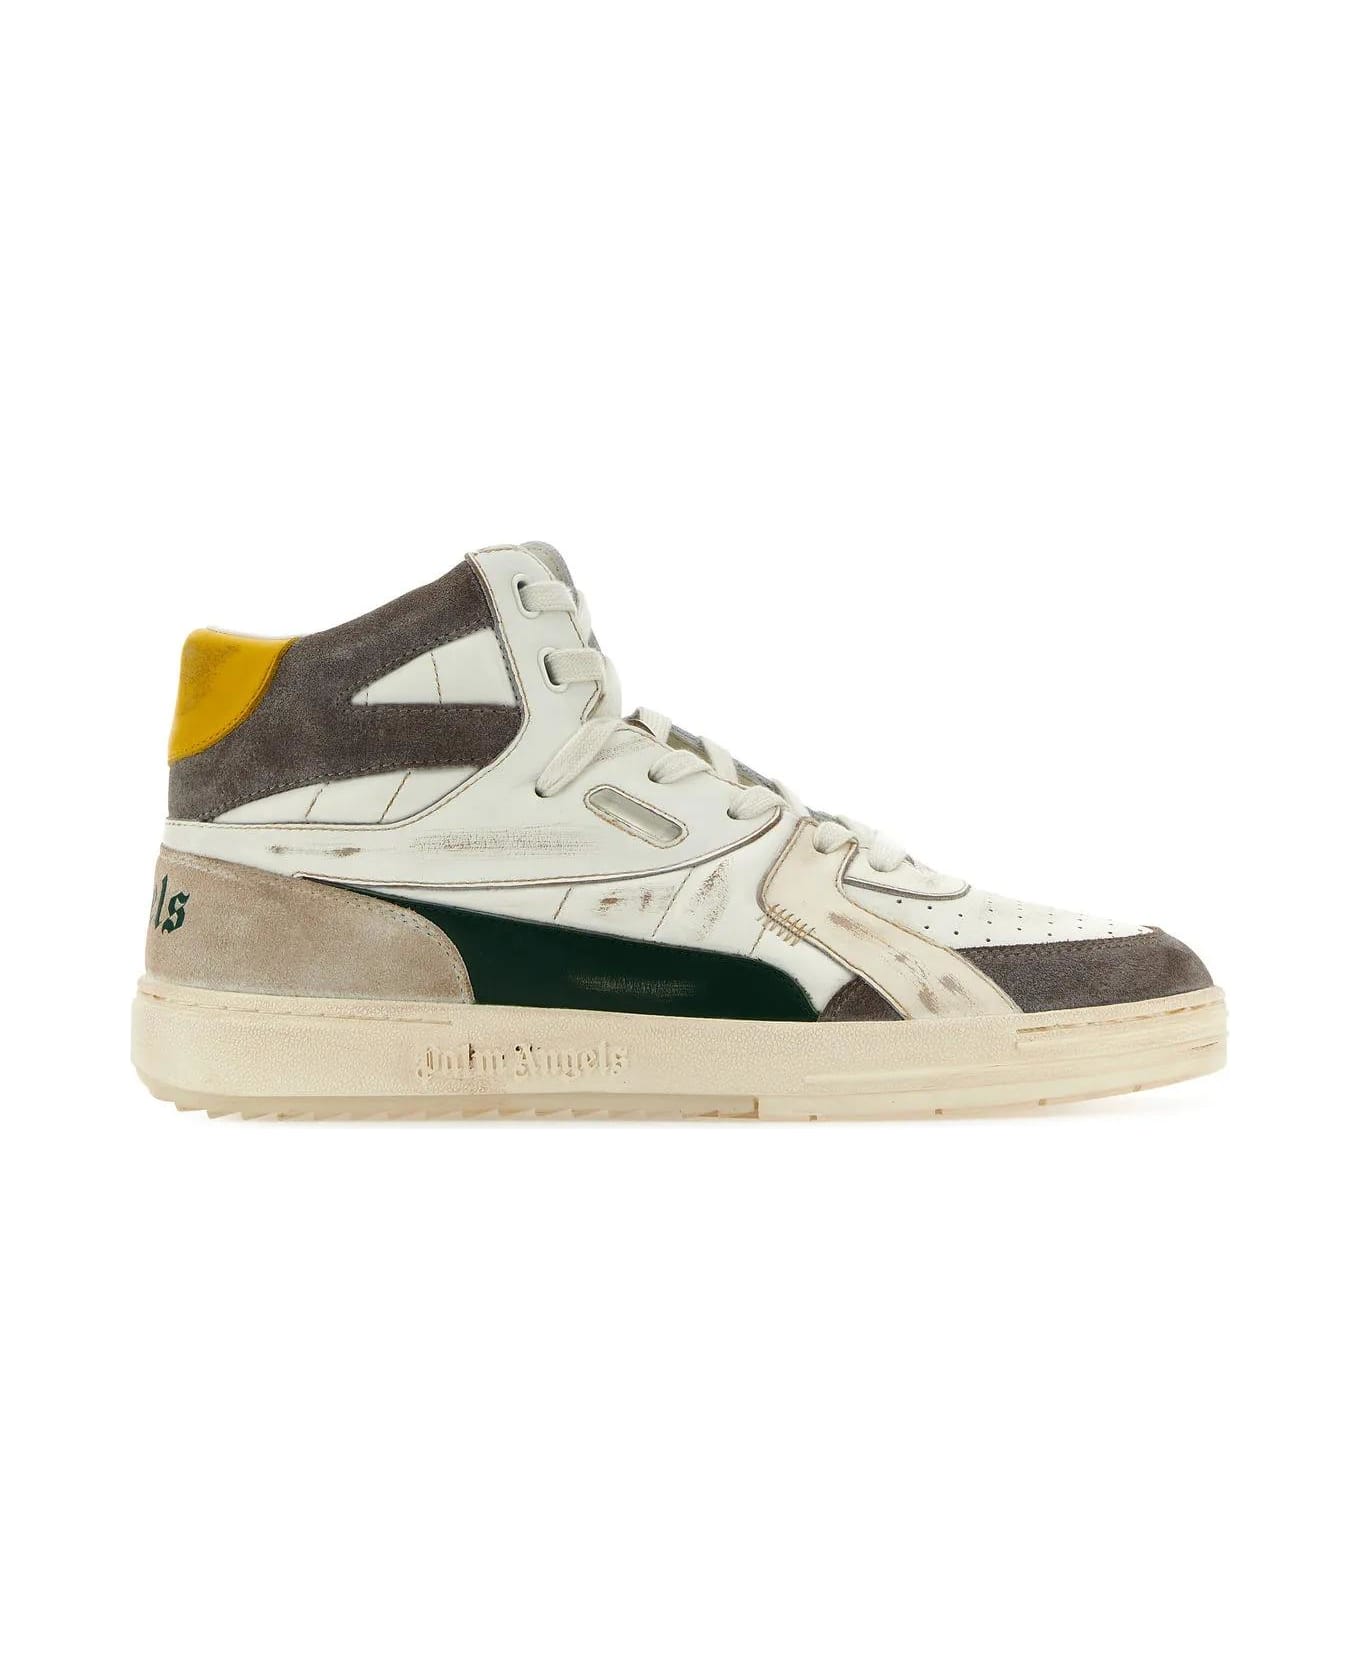 Palm Angels Multicolor Leather Palm University Sneakers - Bianco スニーカー